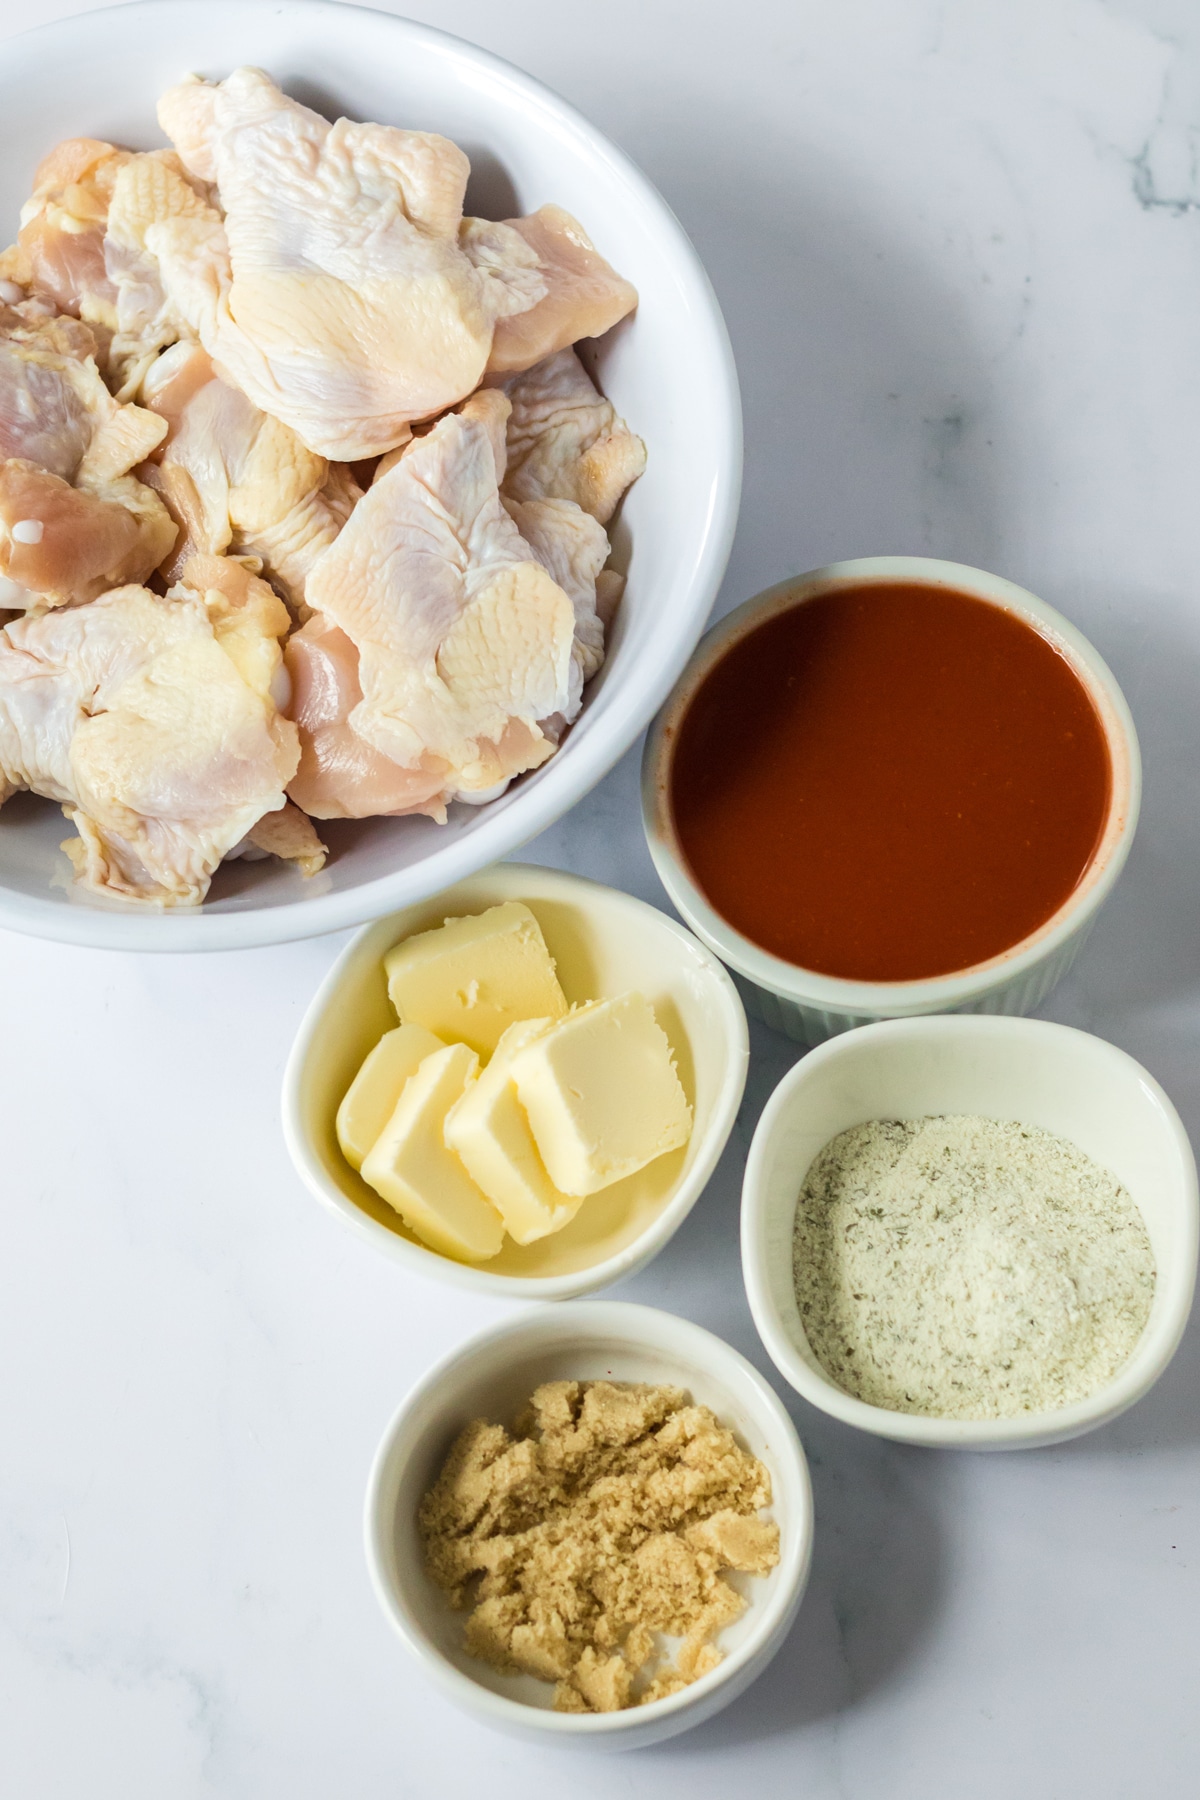 Ingredients for Slow Cooker Buffalo Ranch Wings include Fresh chicken wings, hot wing sauce (Frank's Buffalo Sauce or your favorite), dry ranch seasoning, brown sugar and butter